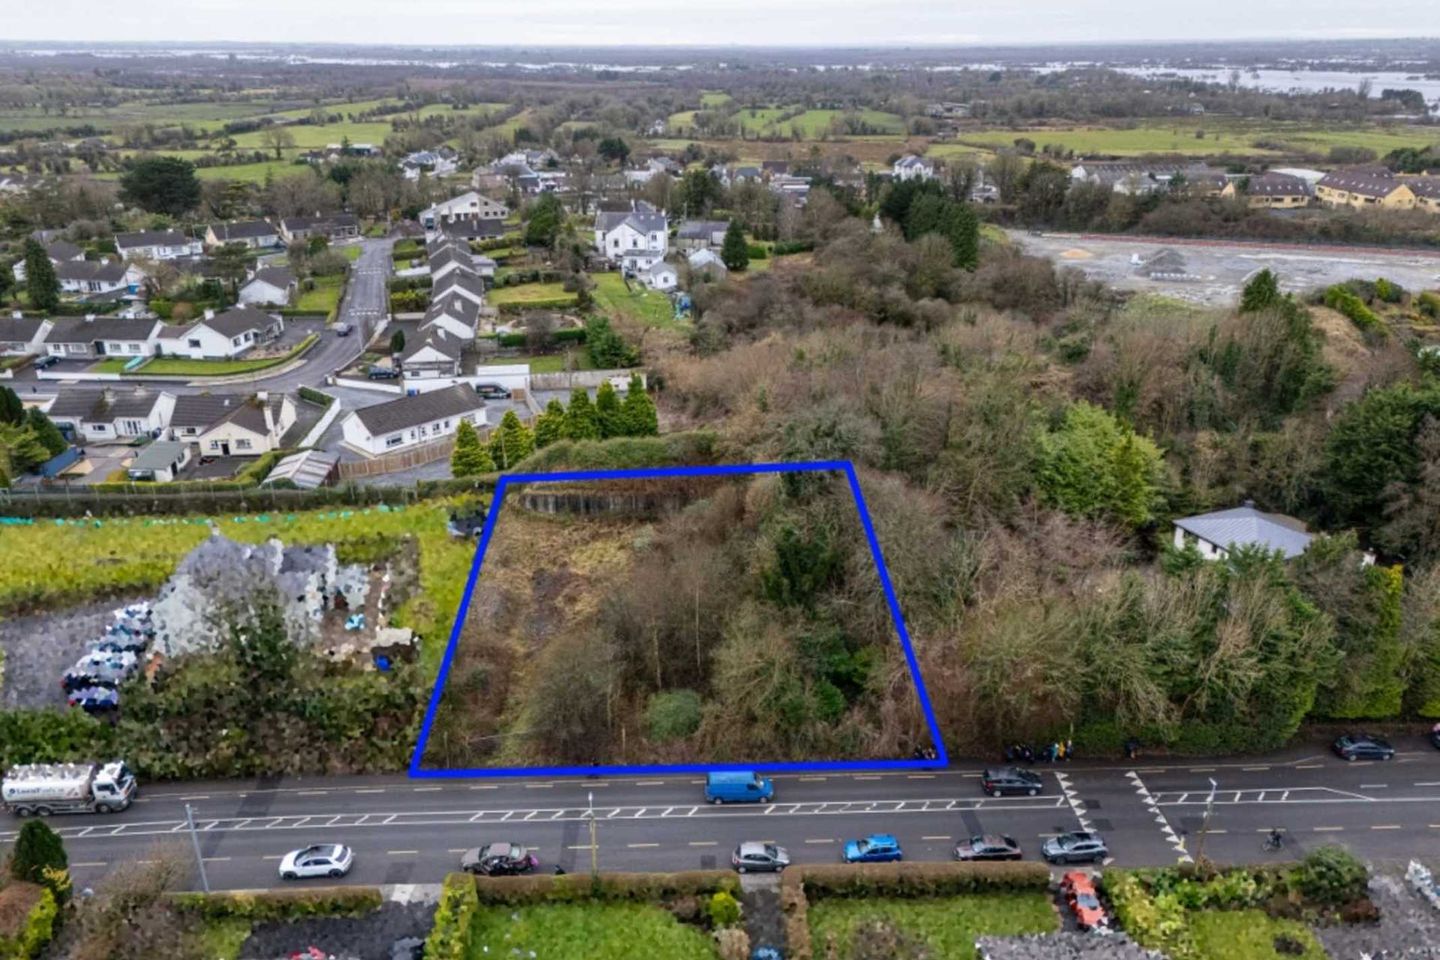 c. 0.30 Acre Site at Retreat Road, Athlone, Co. Westmeath